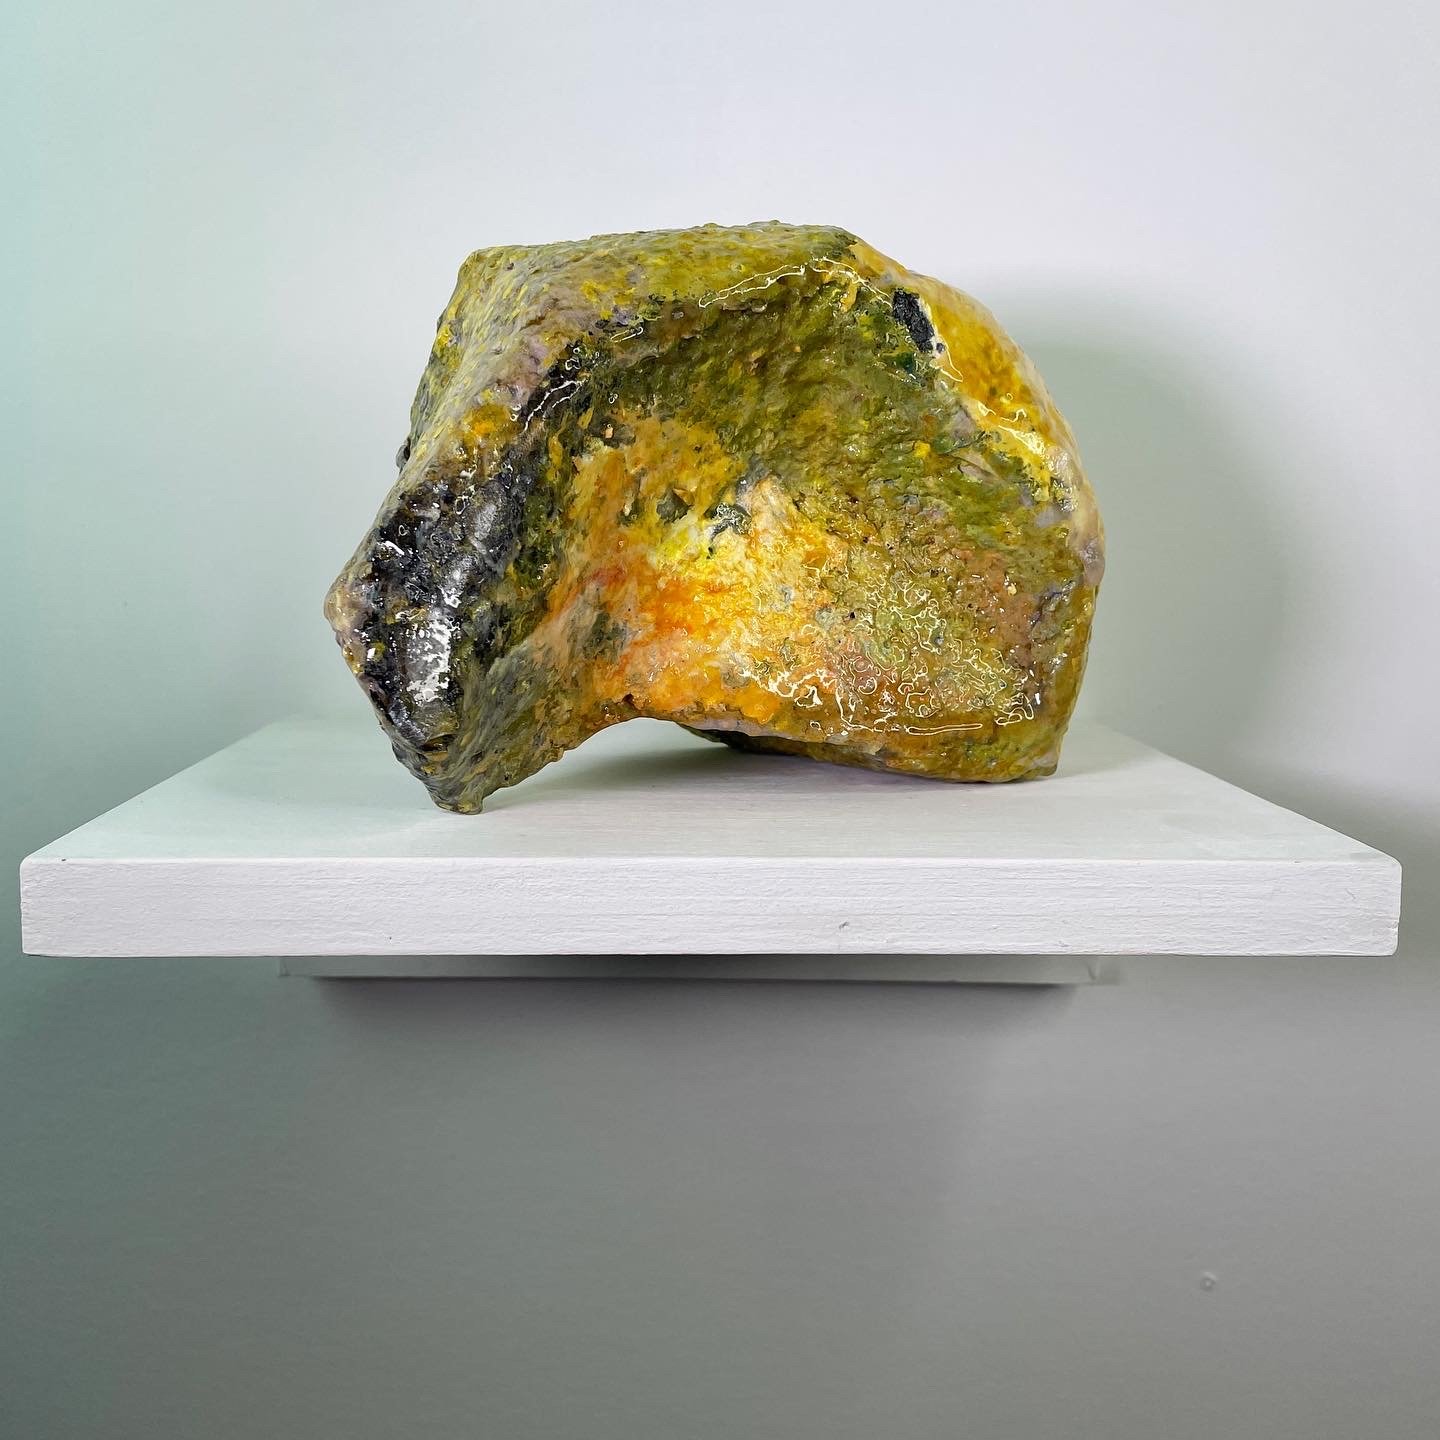  Godlen rod, material collected from family recycling bin paper pulp, plaster, paint and epoxy resin, 2020   